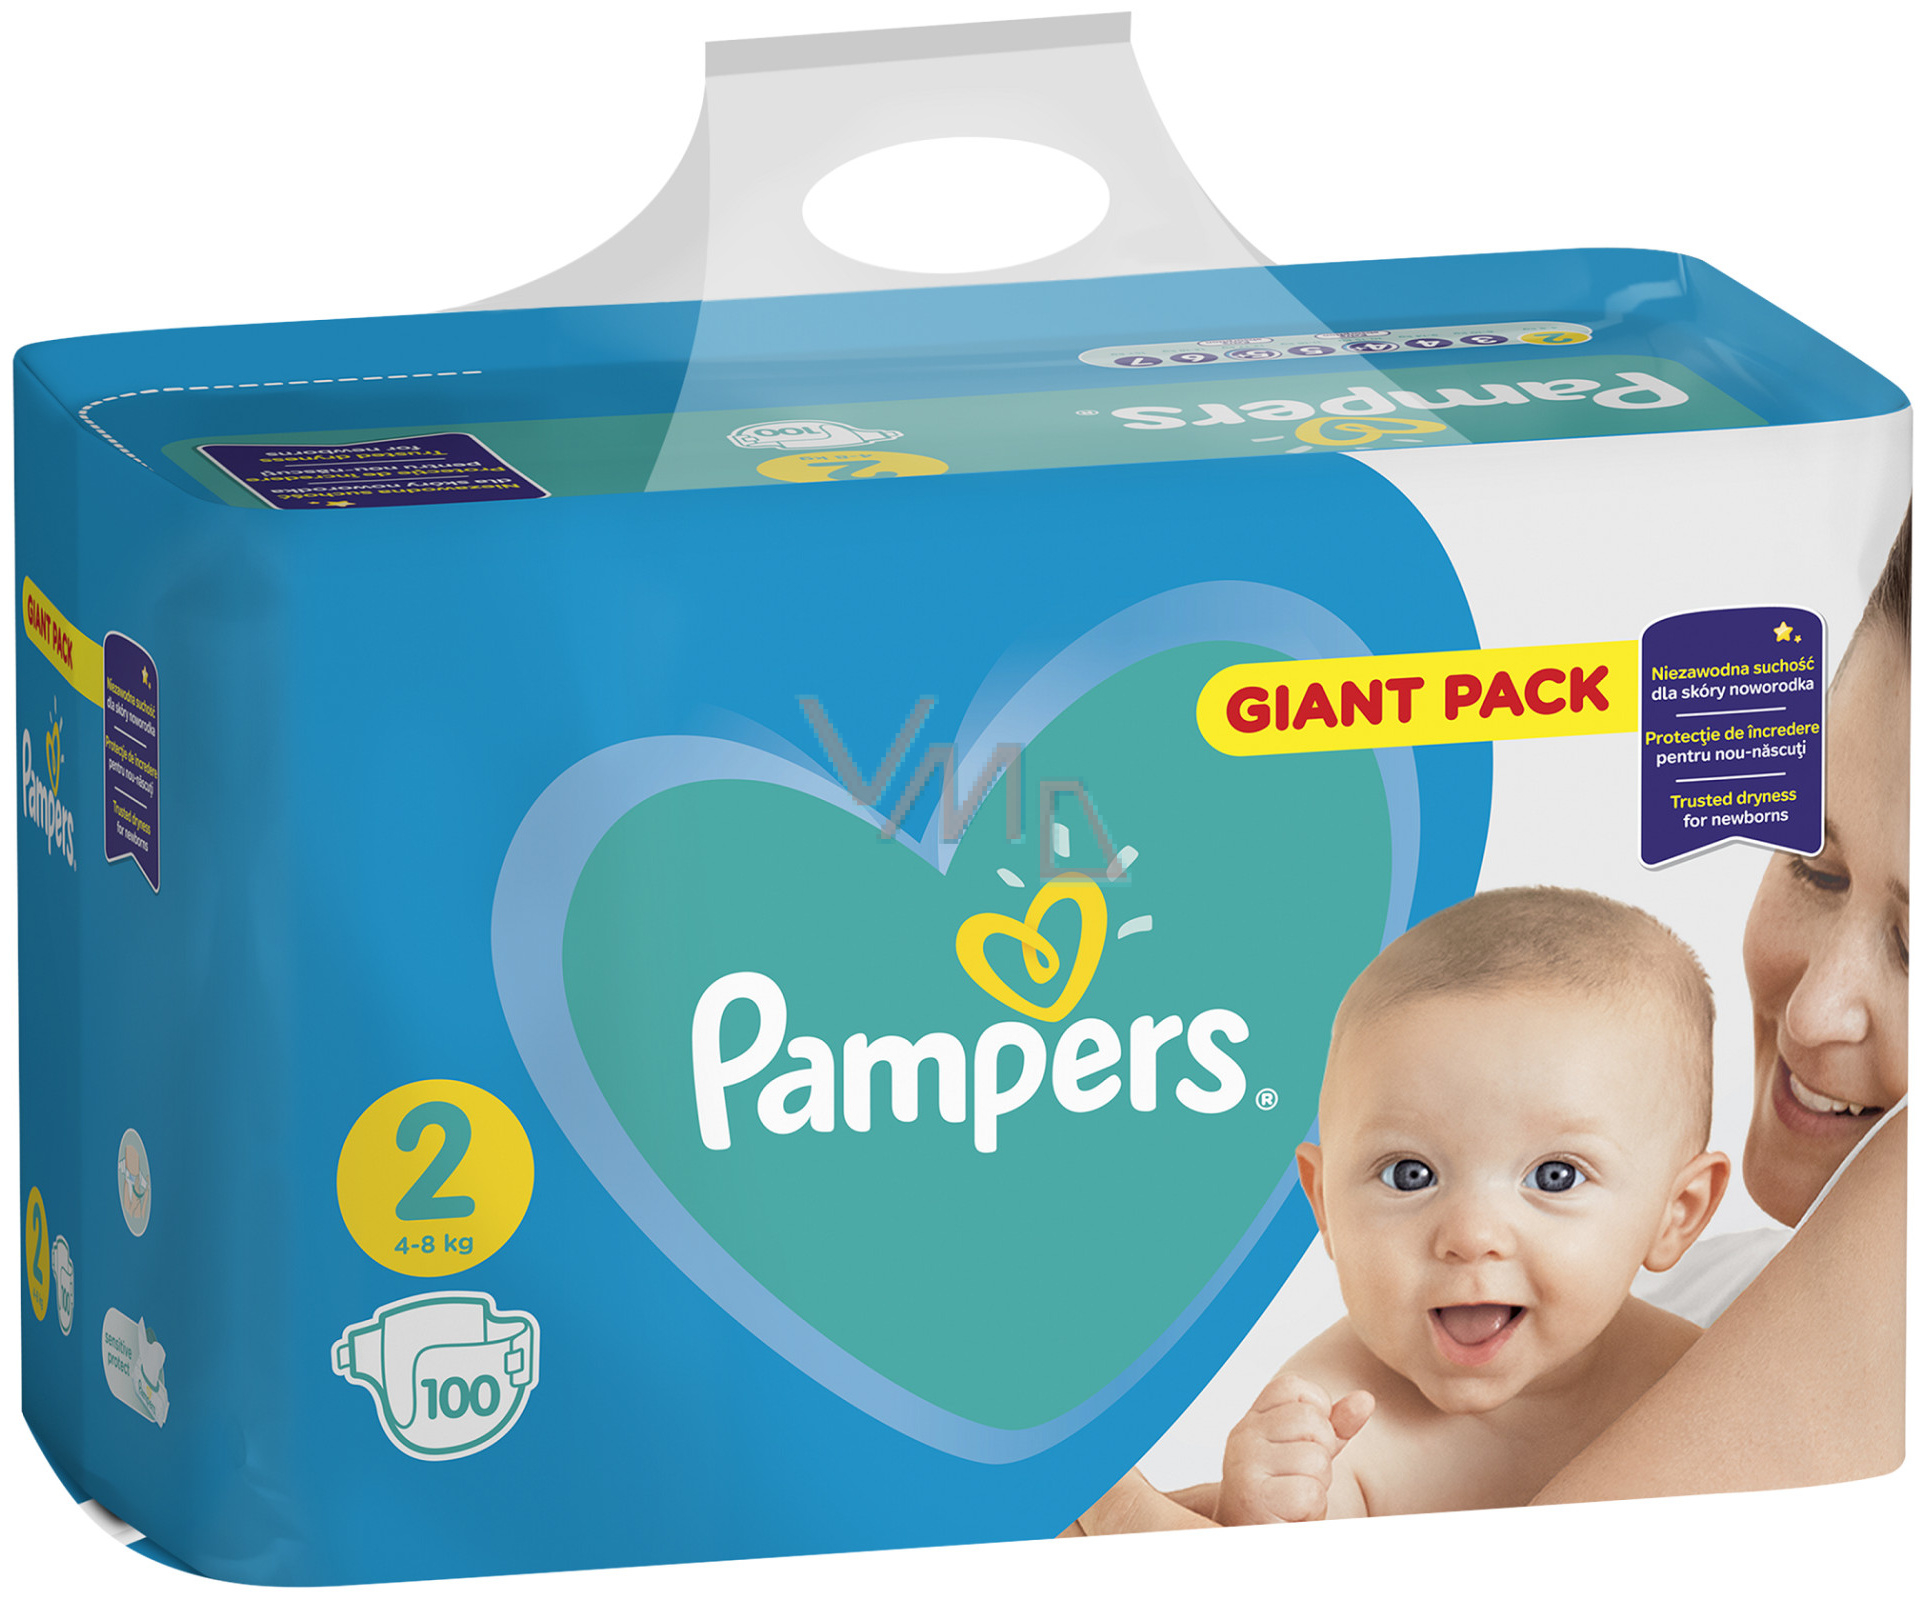 Pampers Giant Mini 2 4-8 kg panties 100 pieces - VMD - drogerie